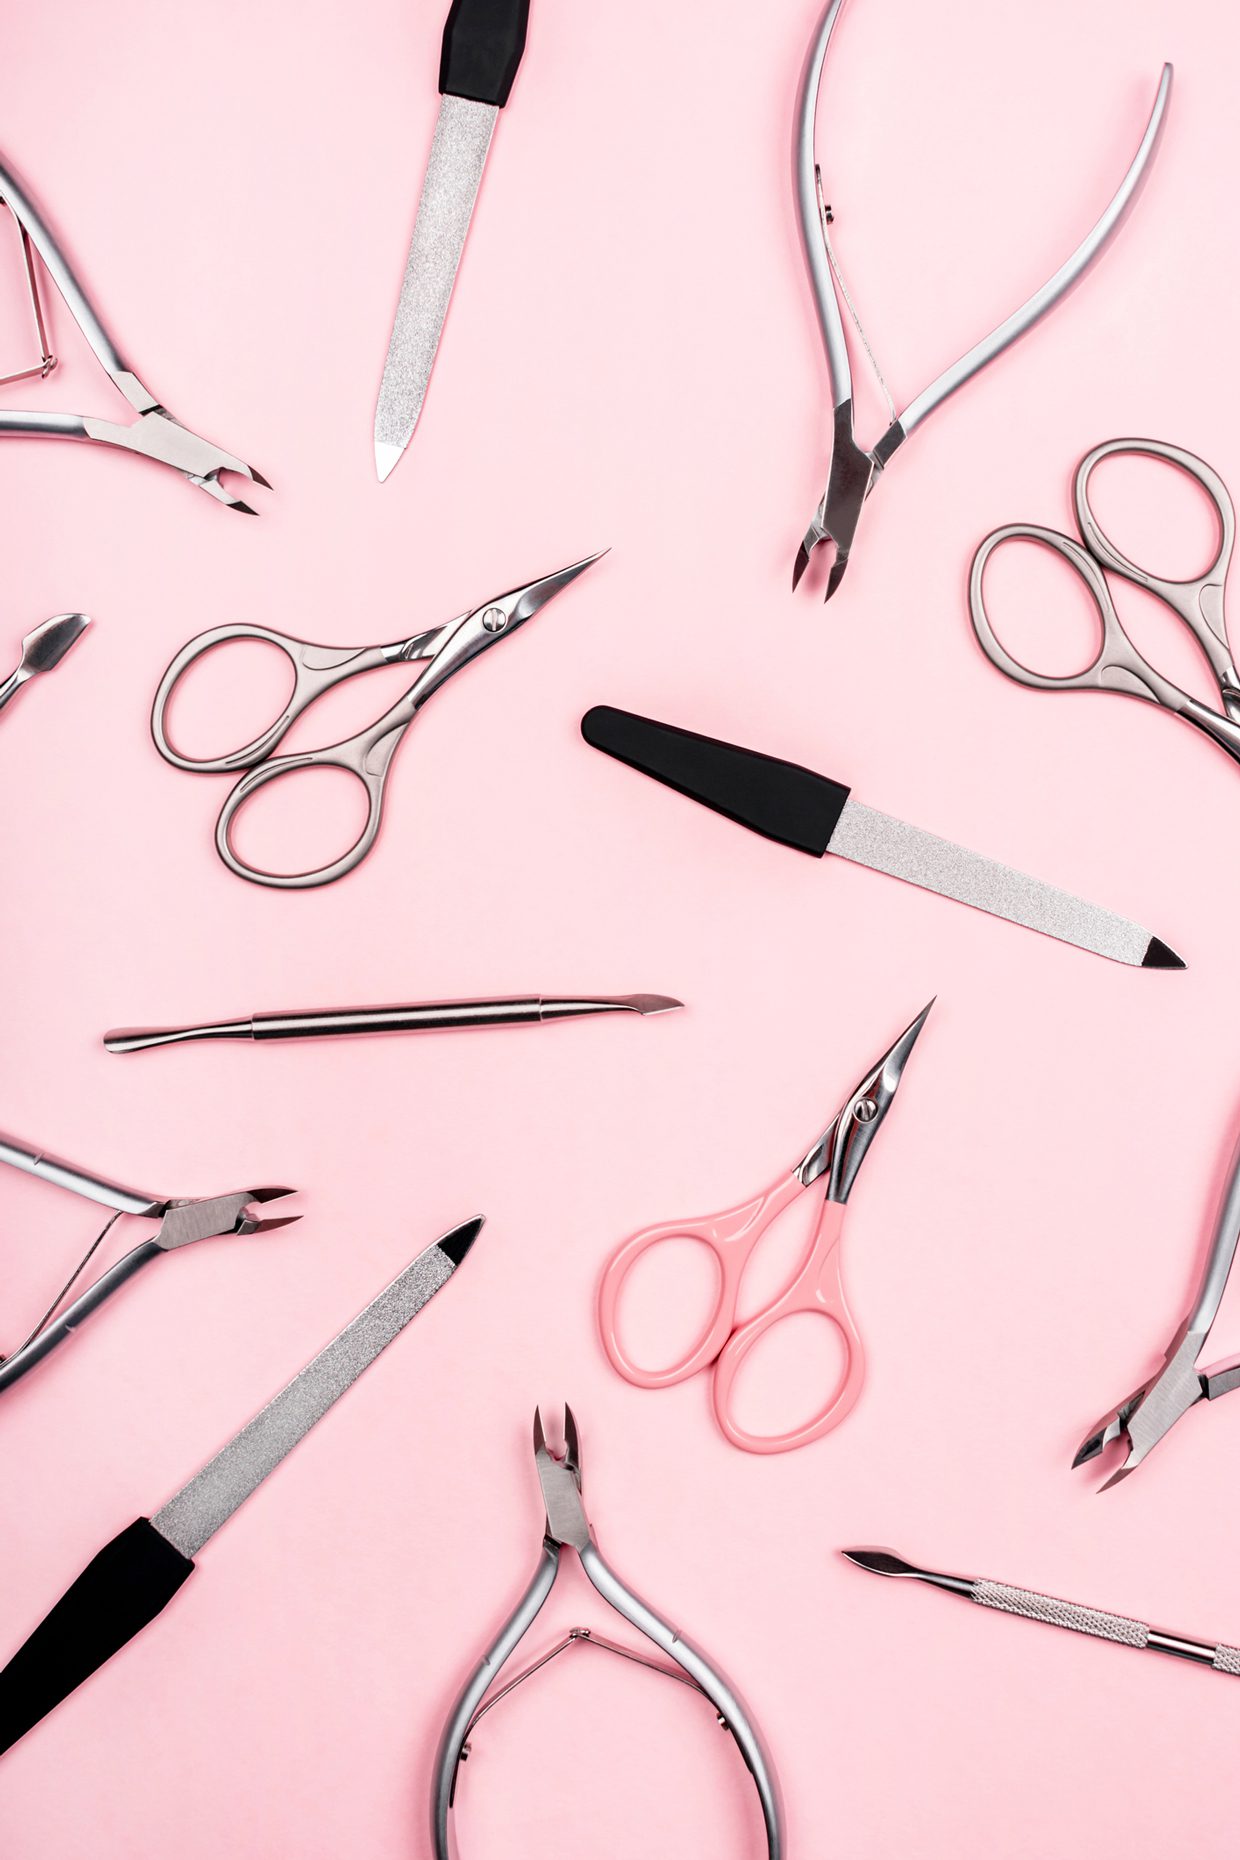 TitleSet of manicure tools on pastel pink background